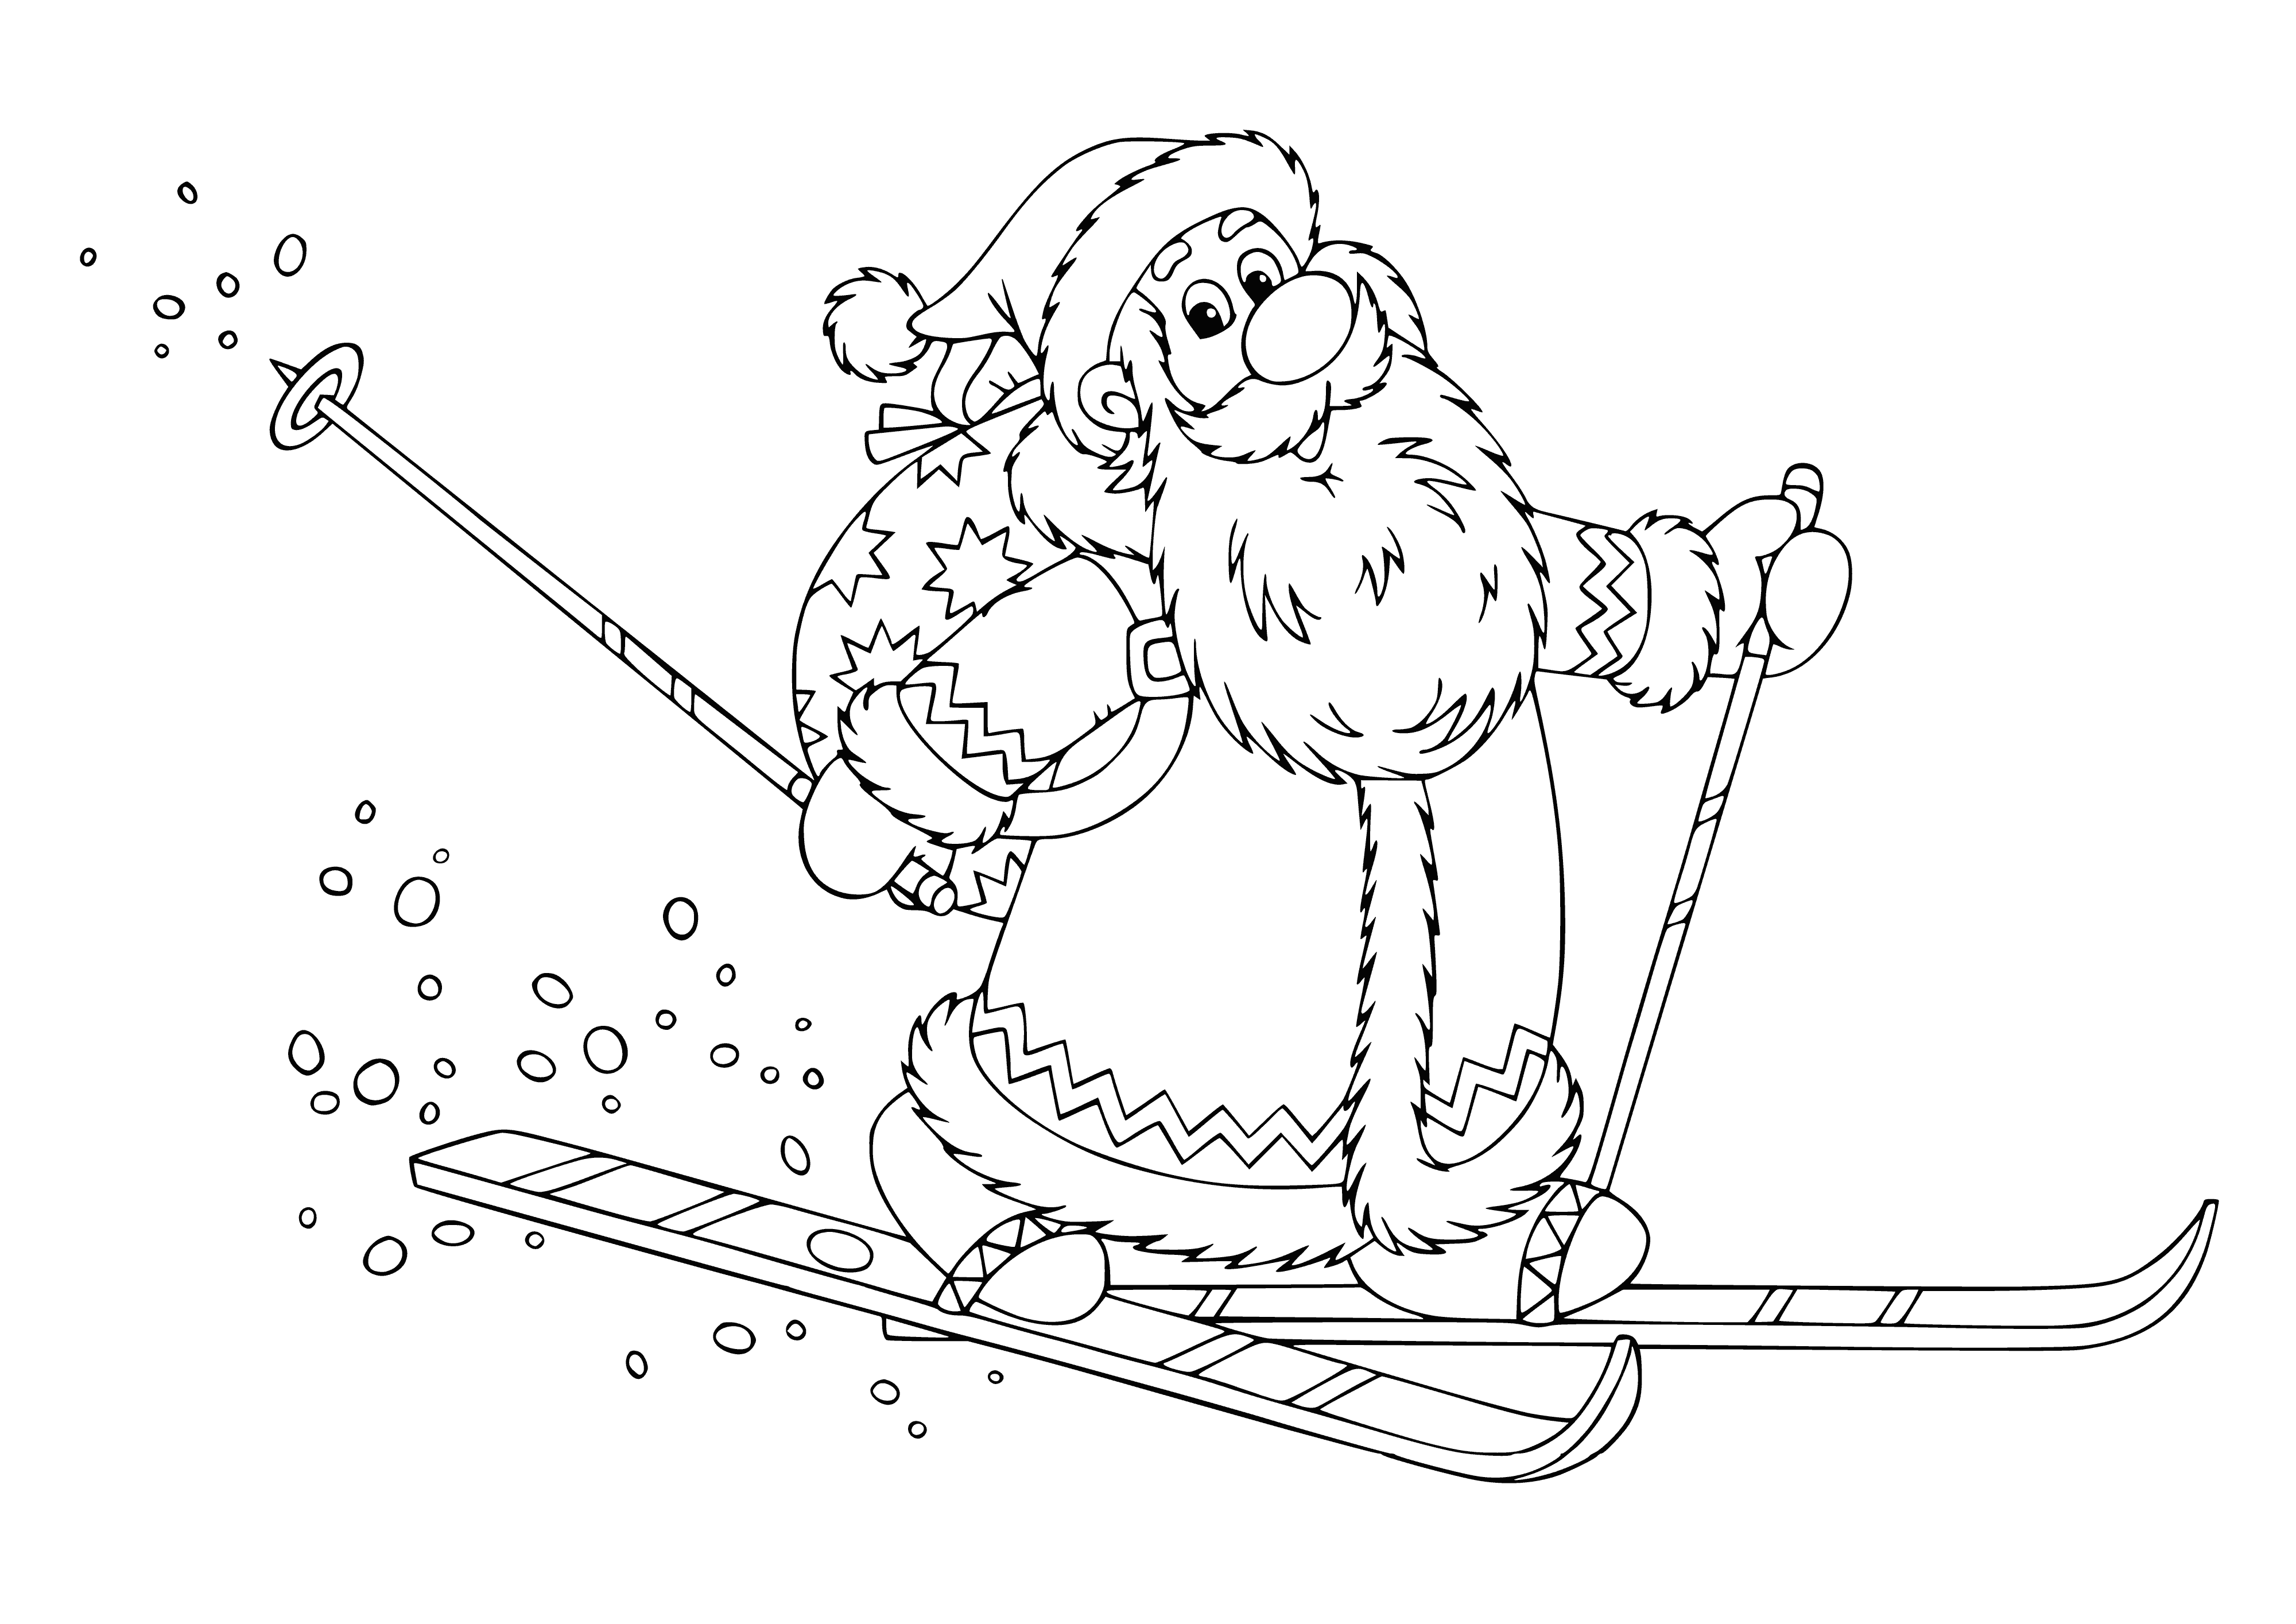 Santa Claus skis down a hill with presents, wearing a red & white suit and white beard & scarf.